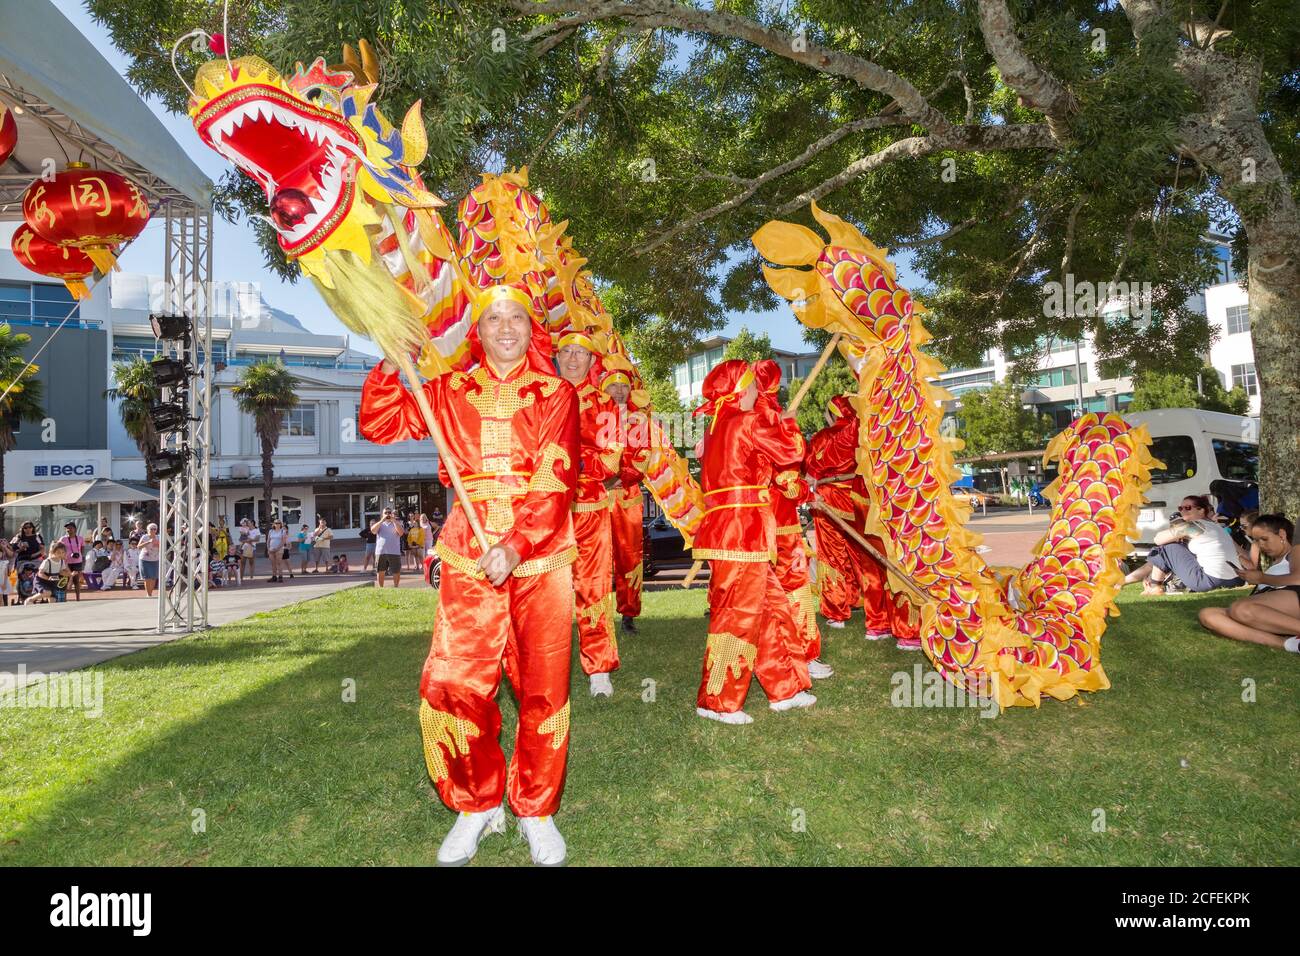 Chinese New Year dragon dancers in a park, carrying a bright yellow and red dragon on poles. Hamilton, New Zealand, 2/16/2019 Stock Photo